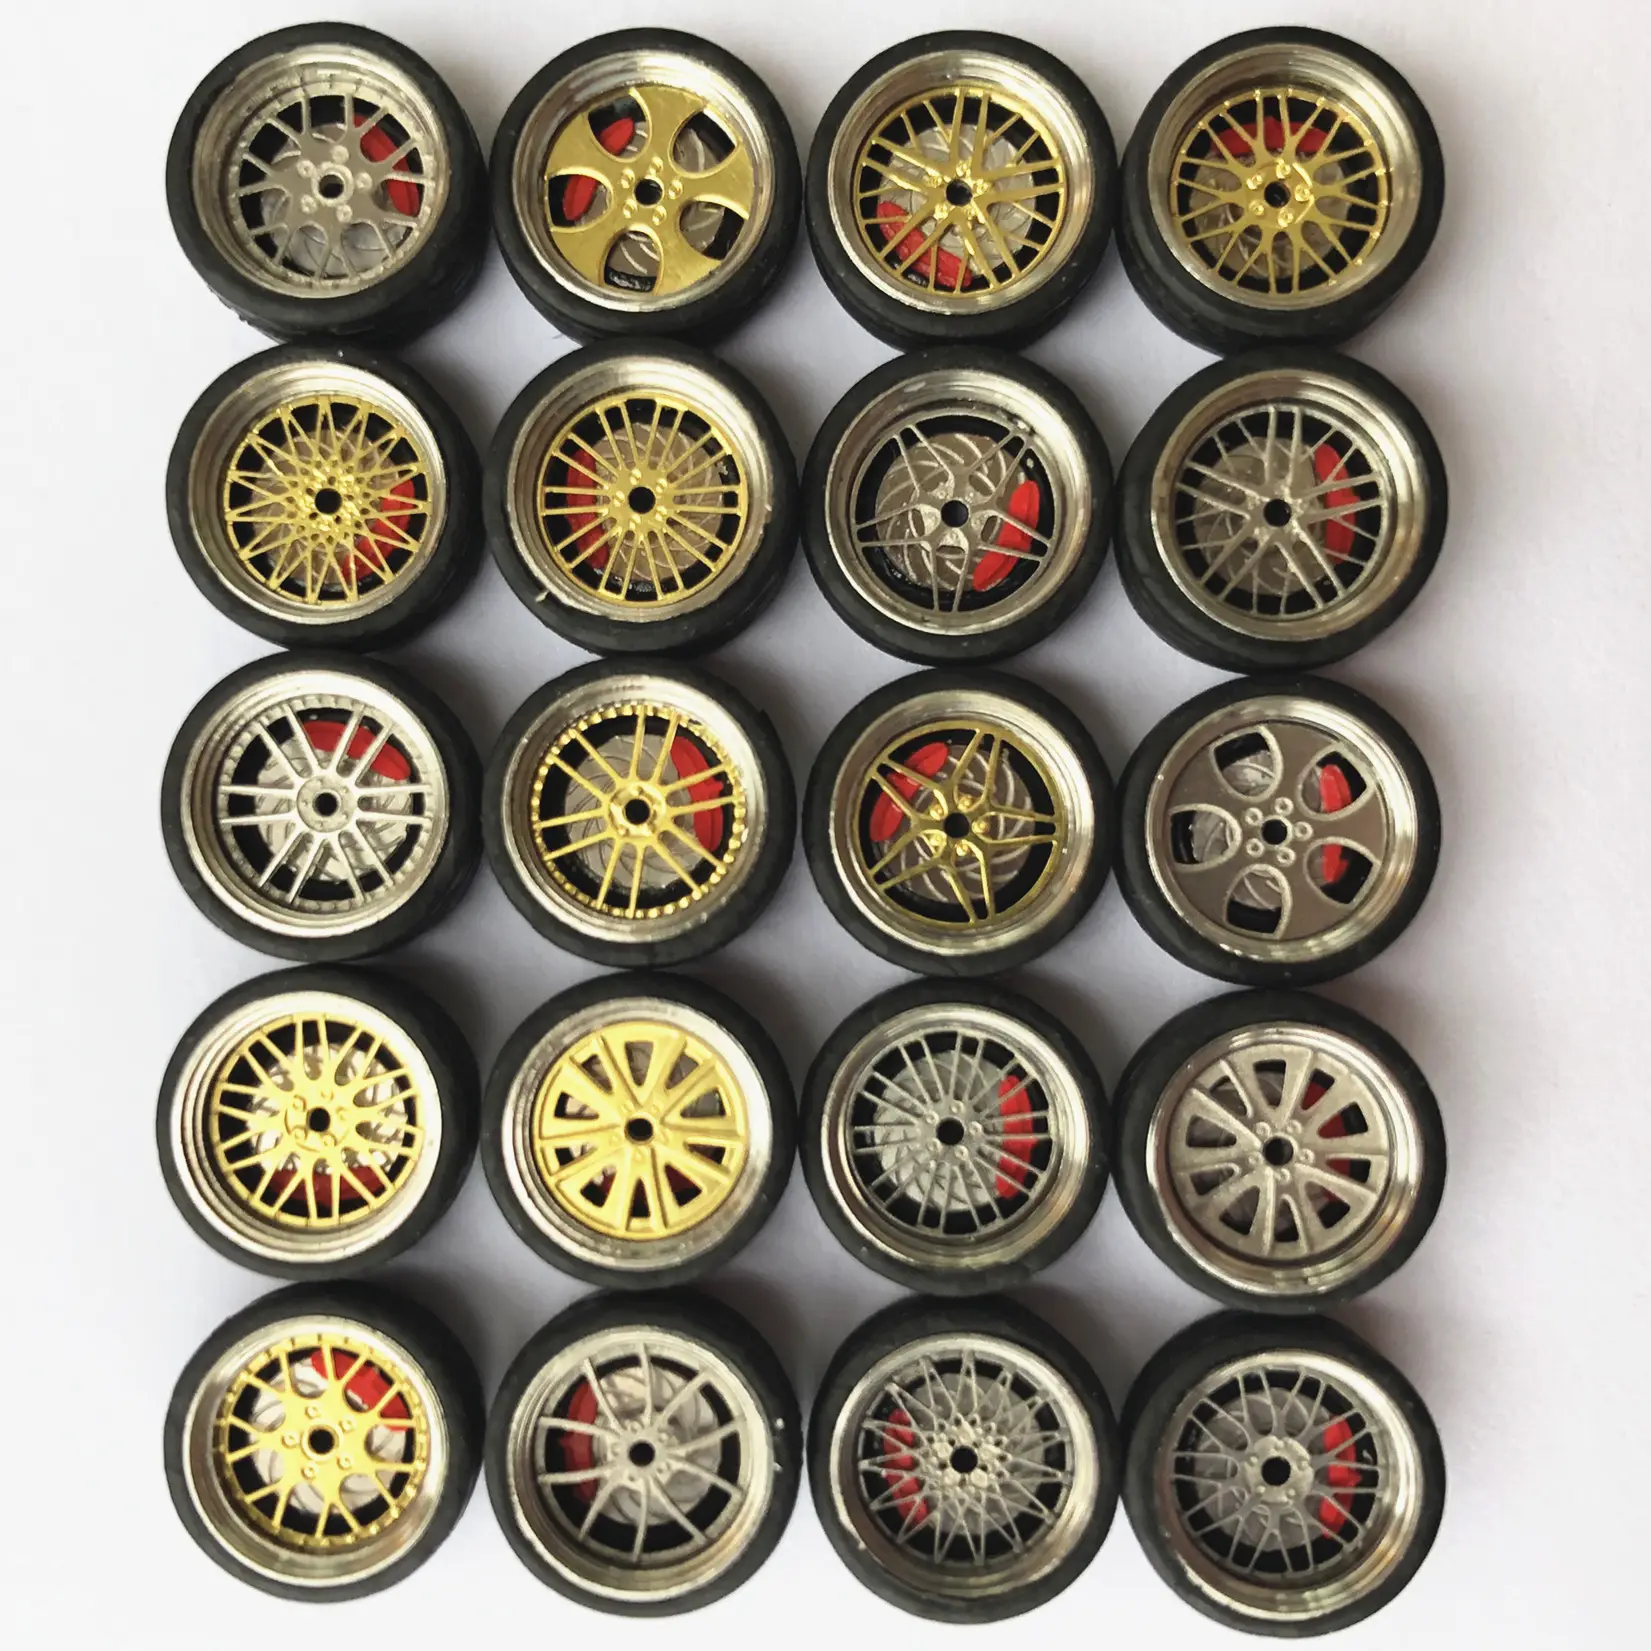 A Type 1:64 Scale Alloy Rubber Wheels Tire Pack Series for Model Cars Hot Wheels